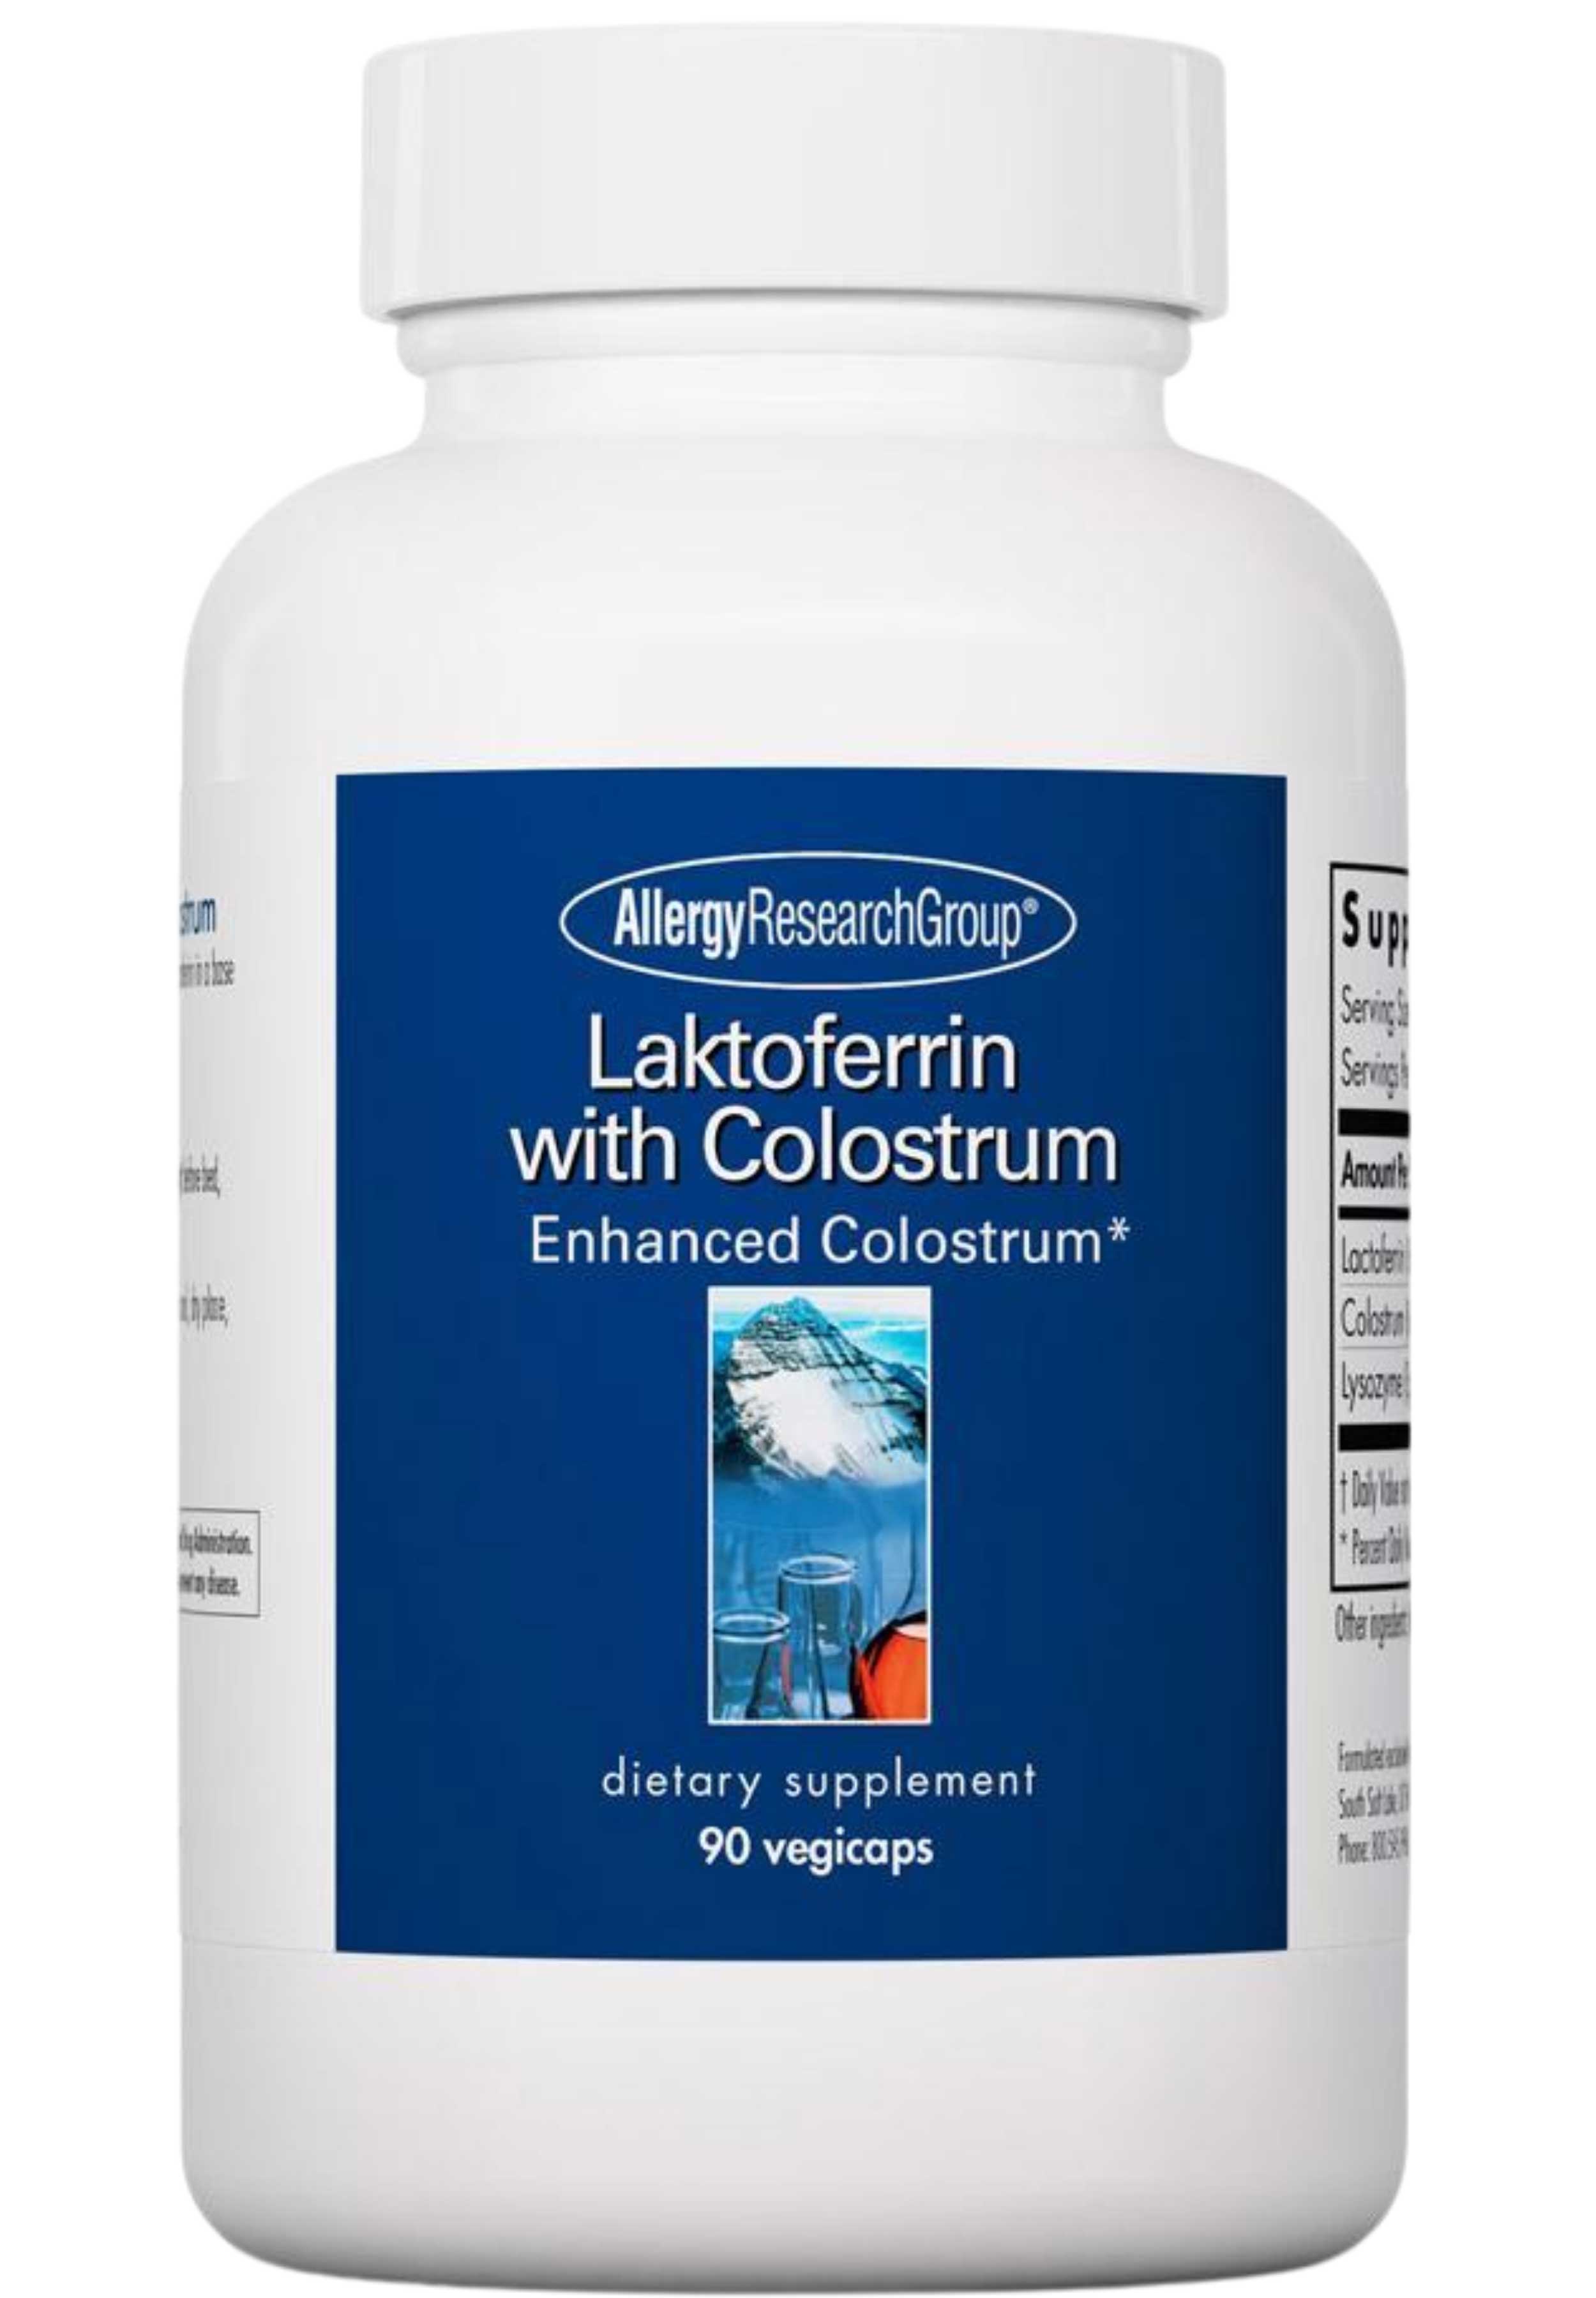 Allergy Research Group Laktoferrin with Colostrum